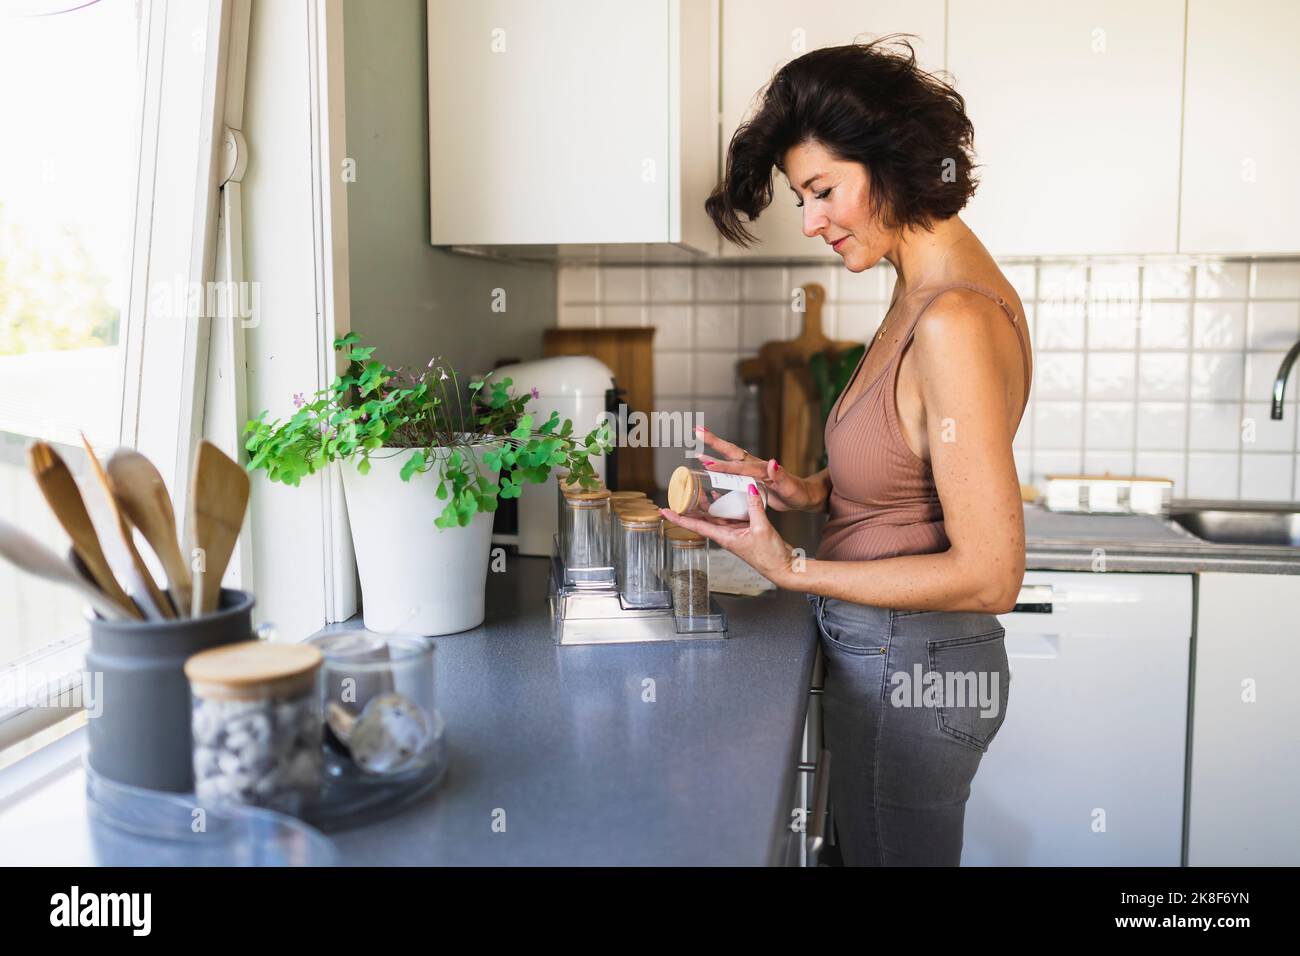 Woman labeling jar standing at kitchen counter Stock Photo